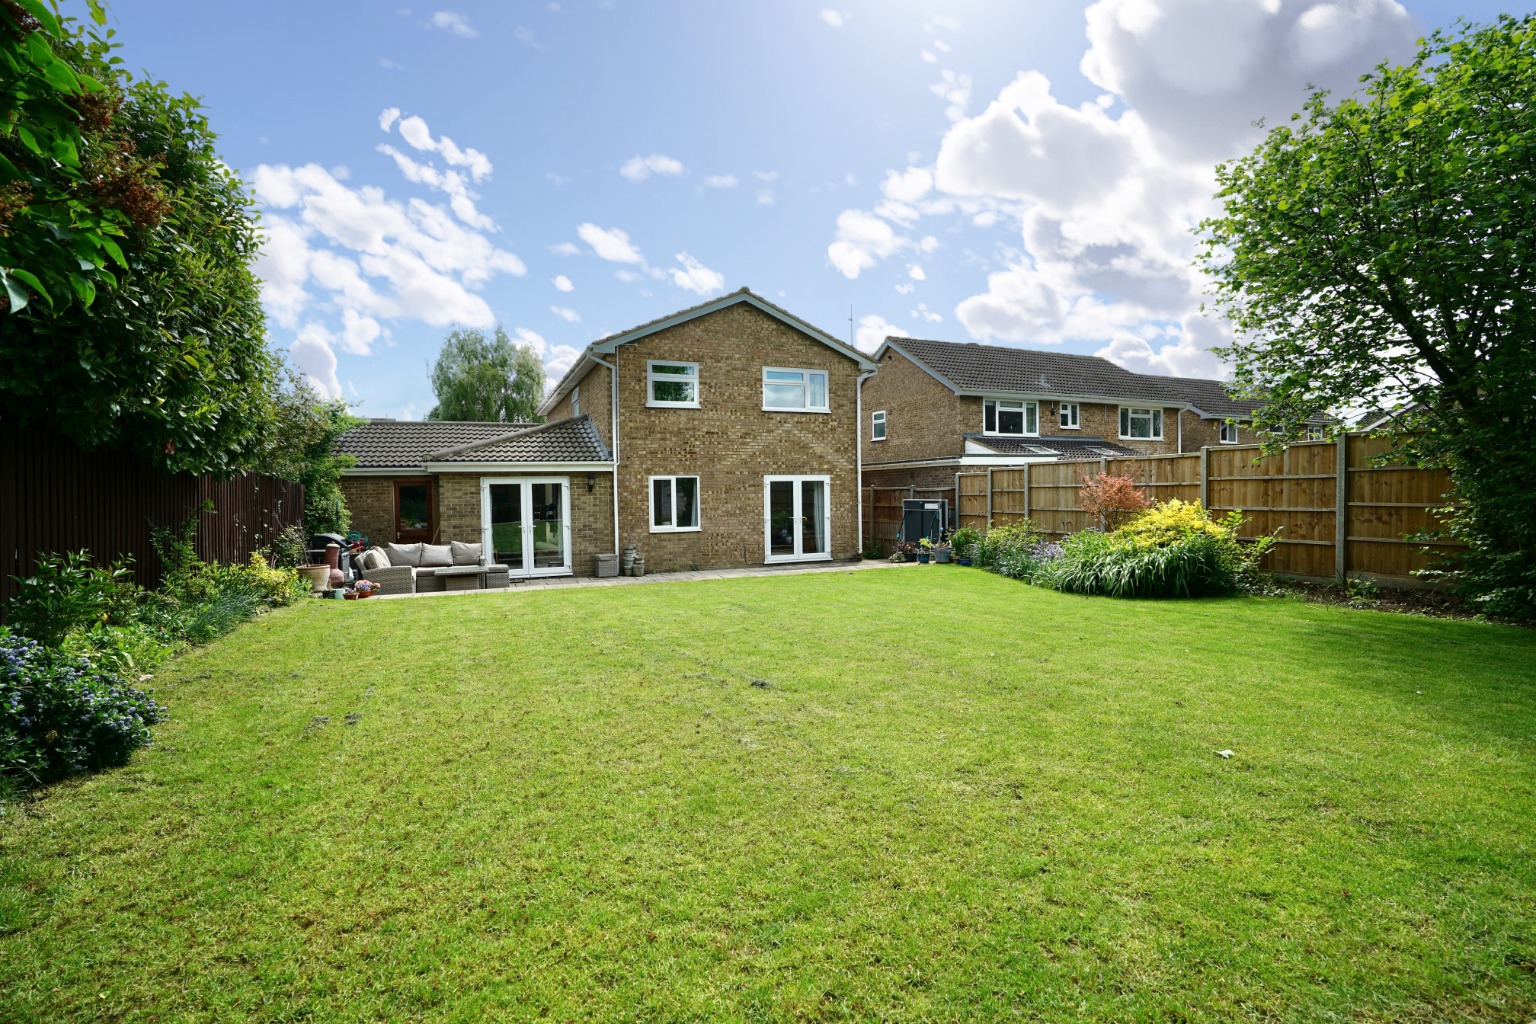 4 bed link detached house for sale in Coleridge Court, St Neots - Property Image 1